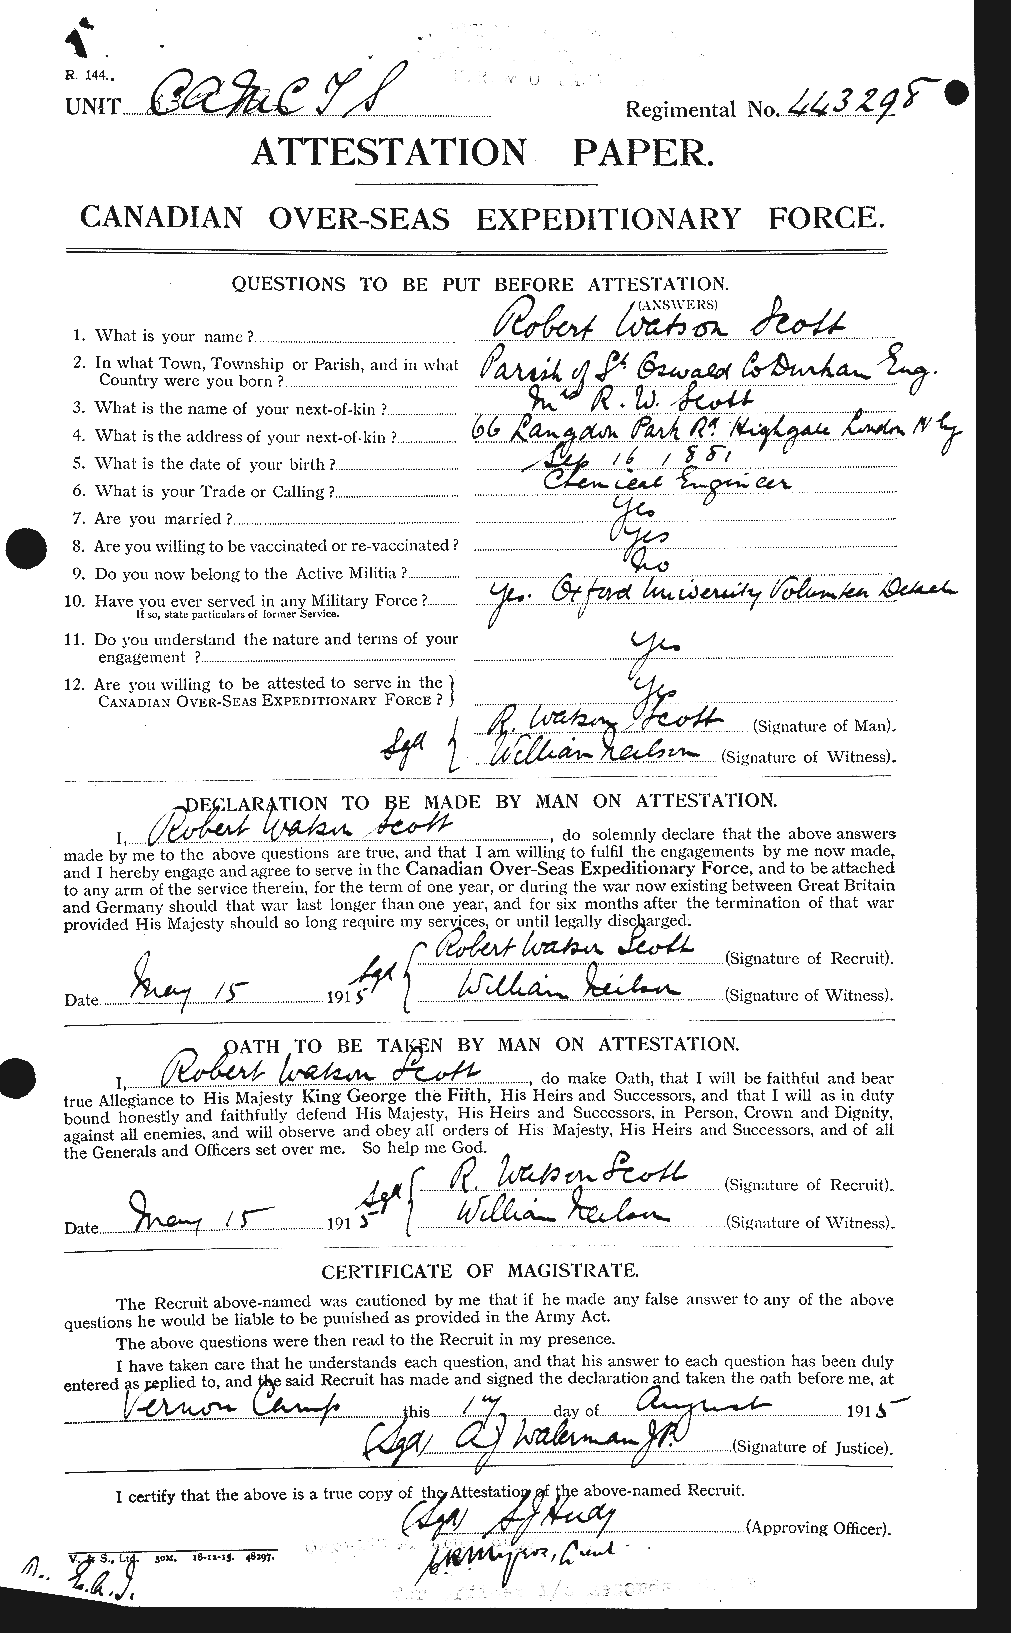 Personnel Records of the First World War - CEF 089114a